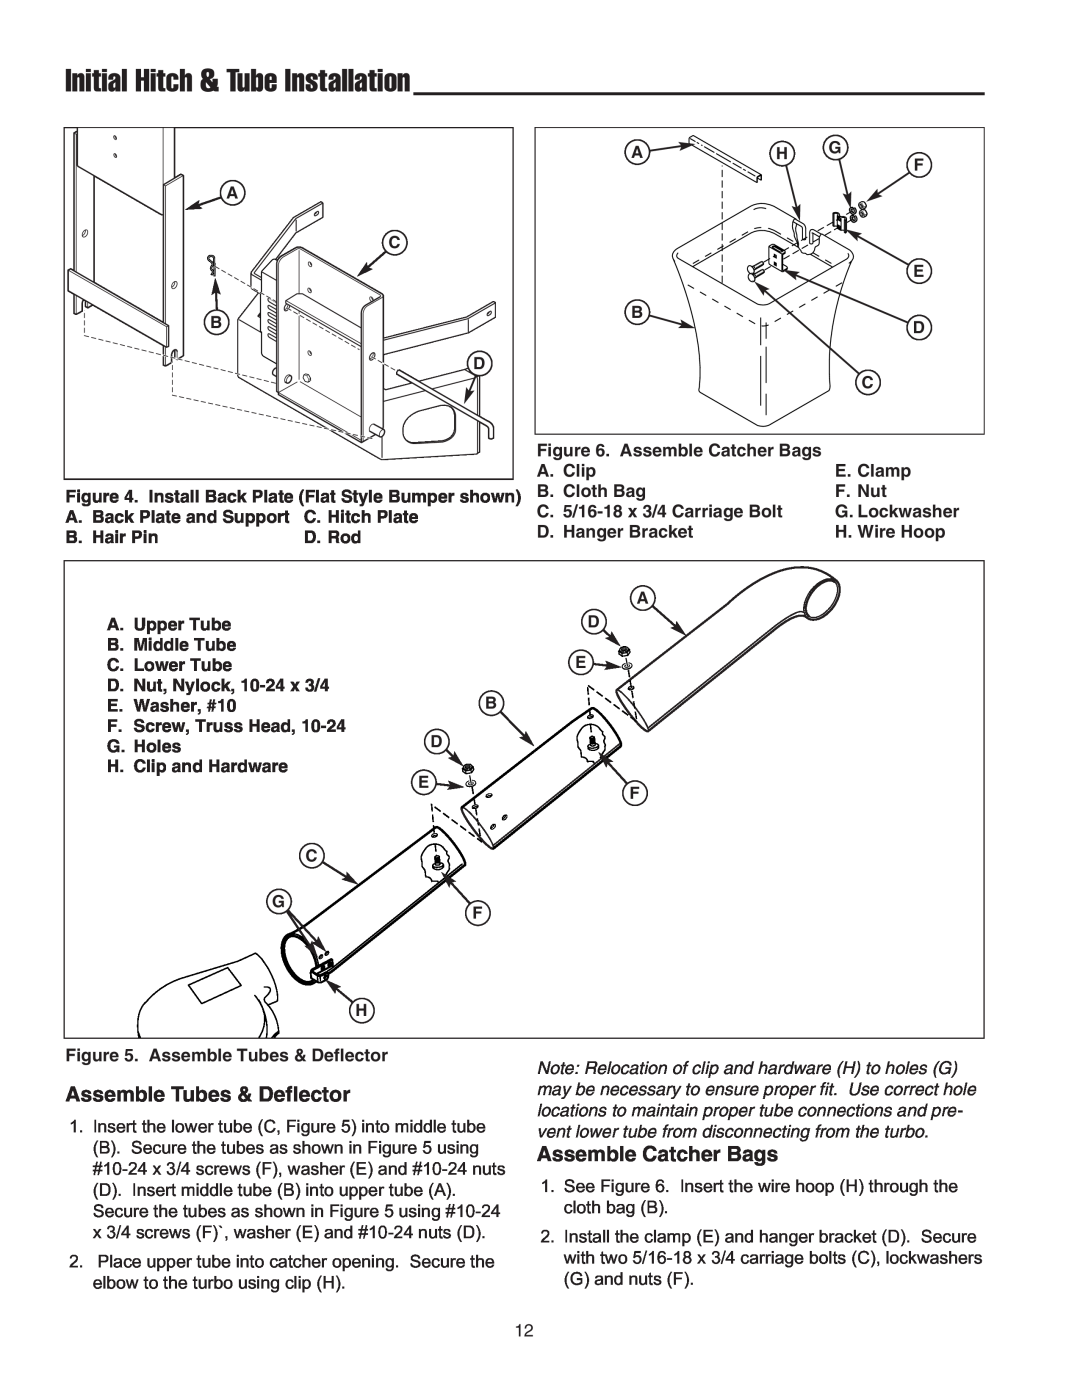 Snapper 1695064 manual Initial Hitch & Tube Installation, Assemble Tubes & Deflector, Assemble Catcher Bags 